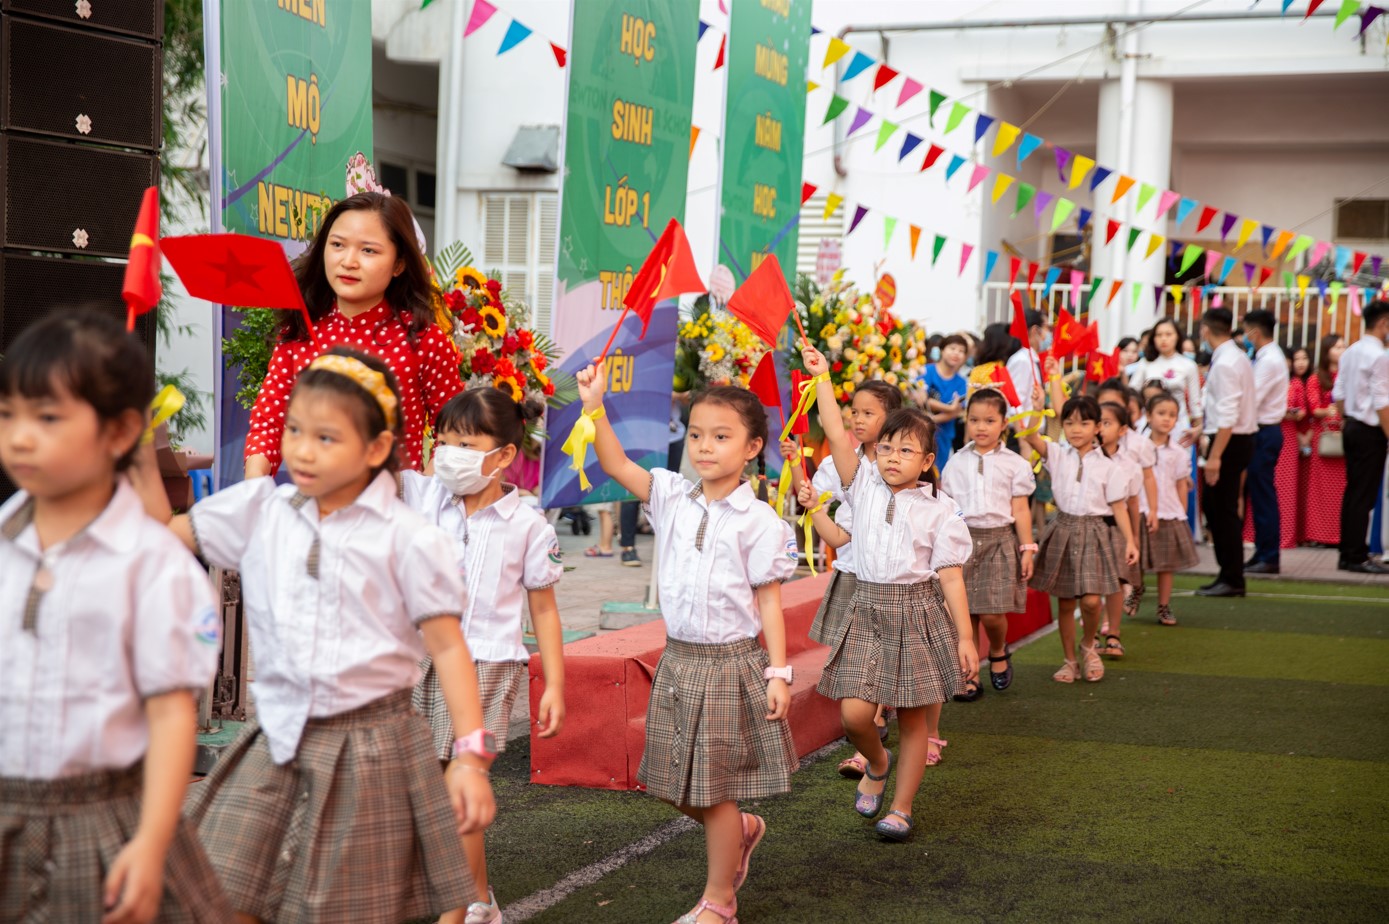 OPENING THE NEW SCHOOL YEAR AND THE MID-AUTUMN FESTIVAL